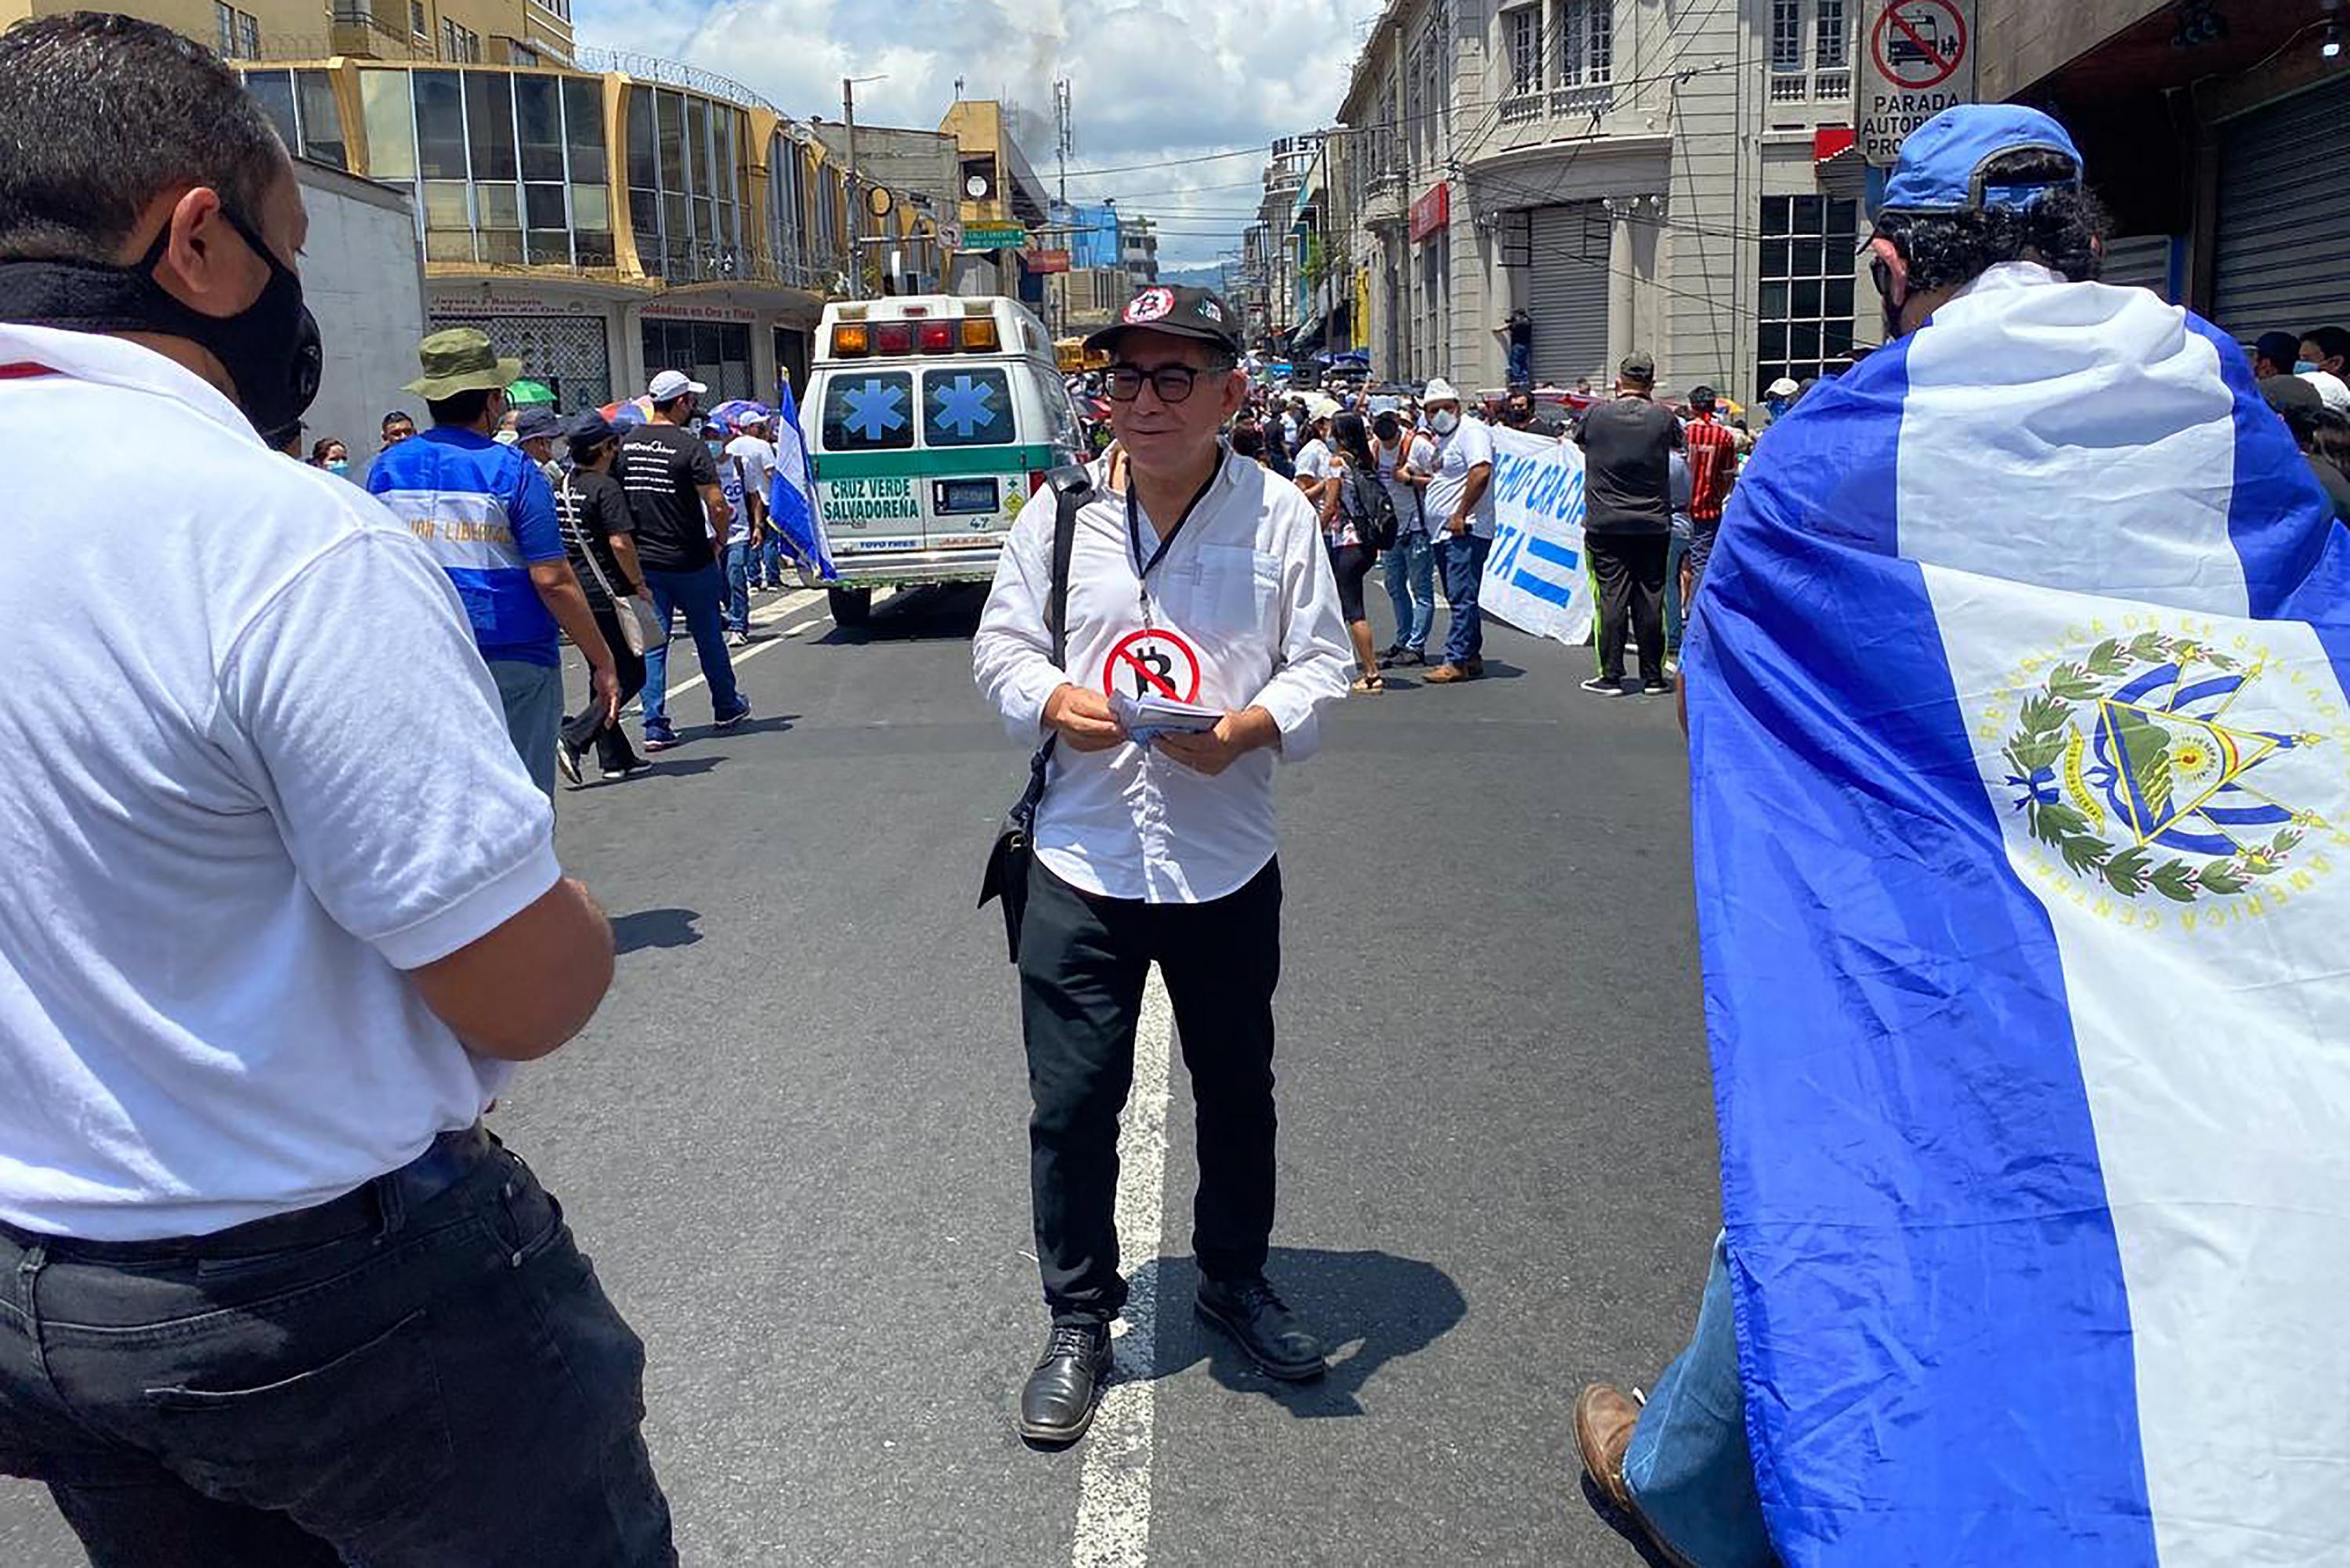 Eugenio Chicas, a former FMLN leader, in the manifestations against the Bukele administration on Sep. 15, 2021, the bicentennial anniversary of Salvadoran independence. Chicas is one of the main organizers of an alliance between civil society movements and political parties to propose a unified presidential ticket. Photo Gabriel Labrador